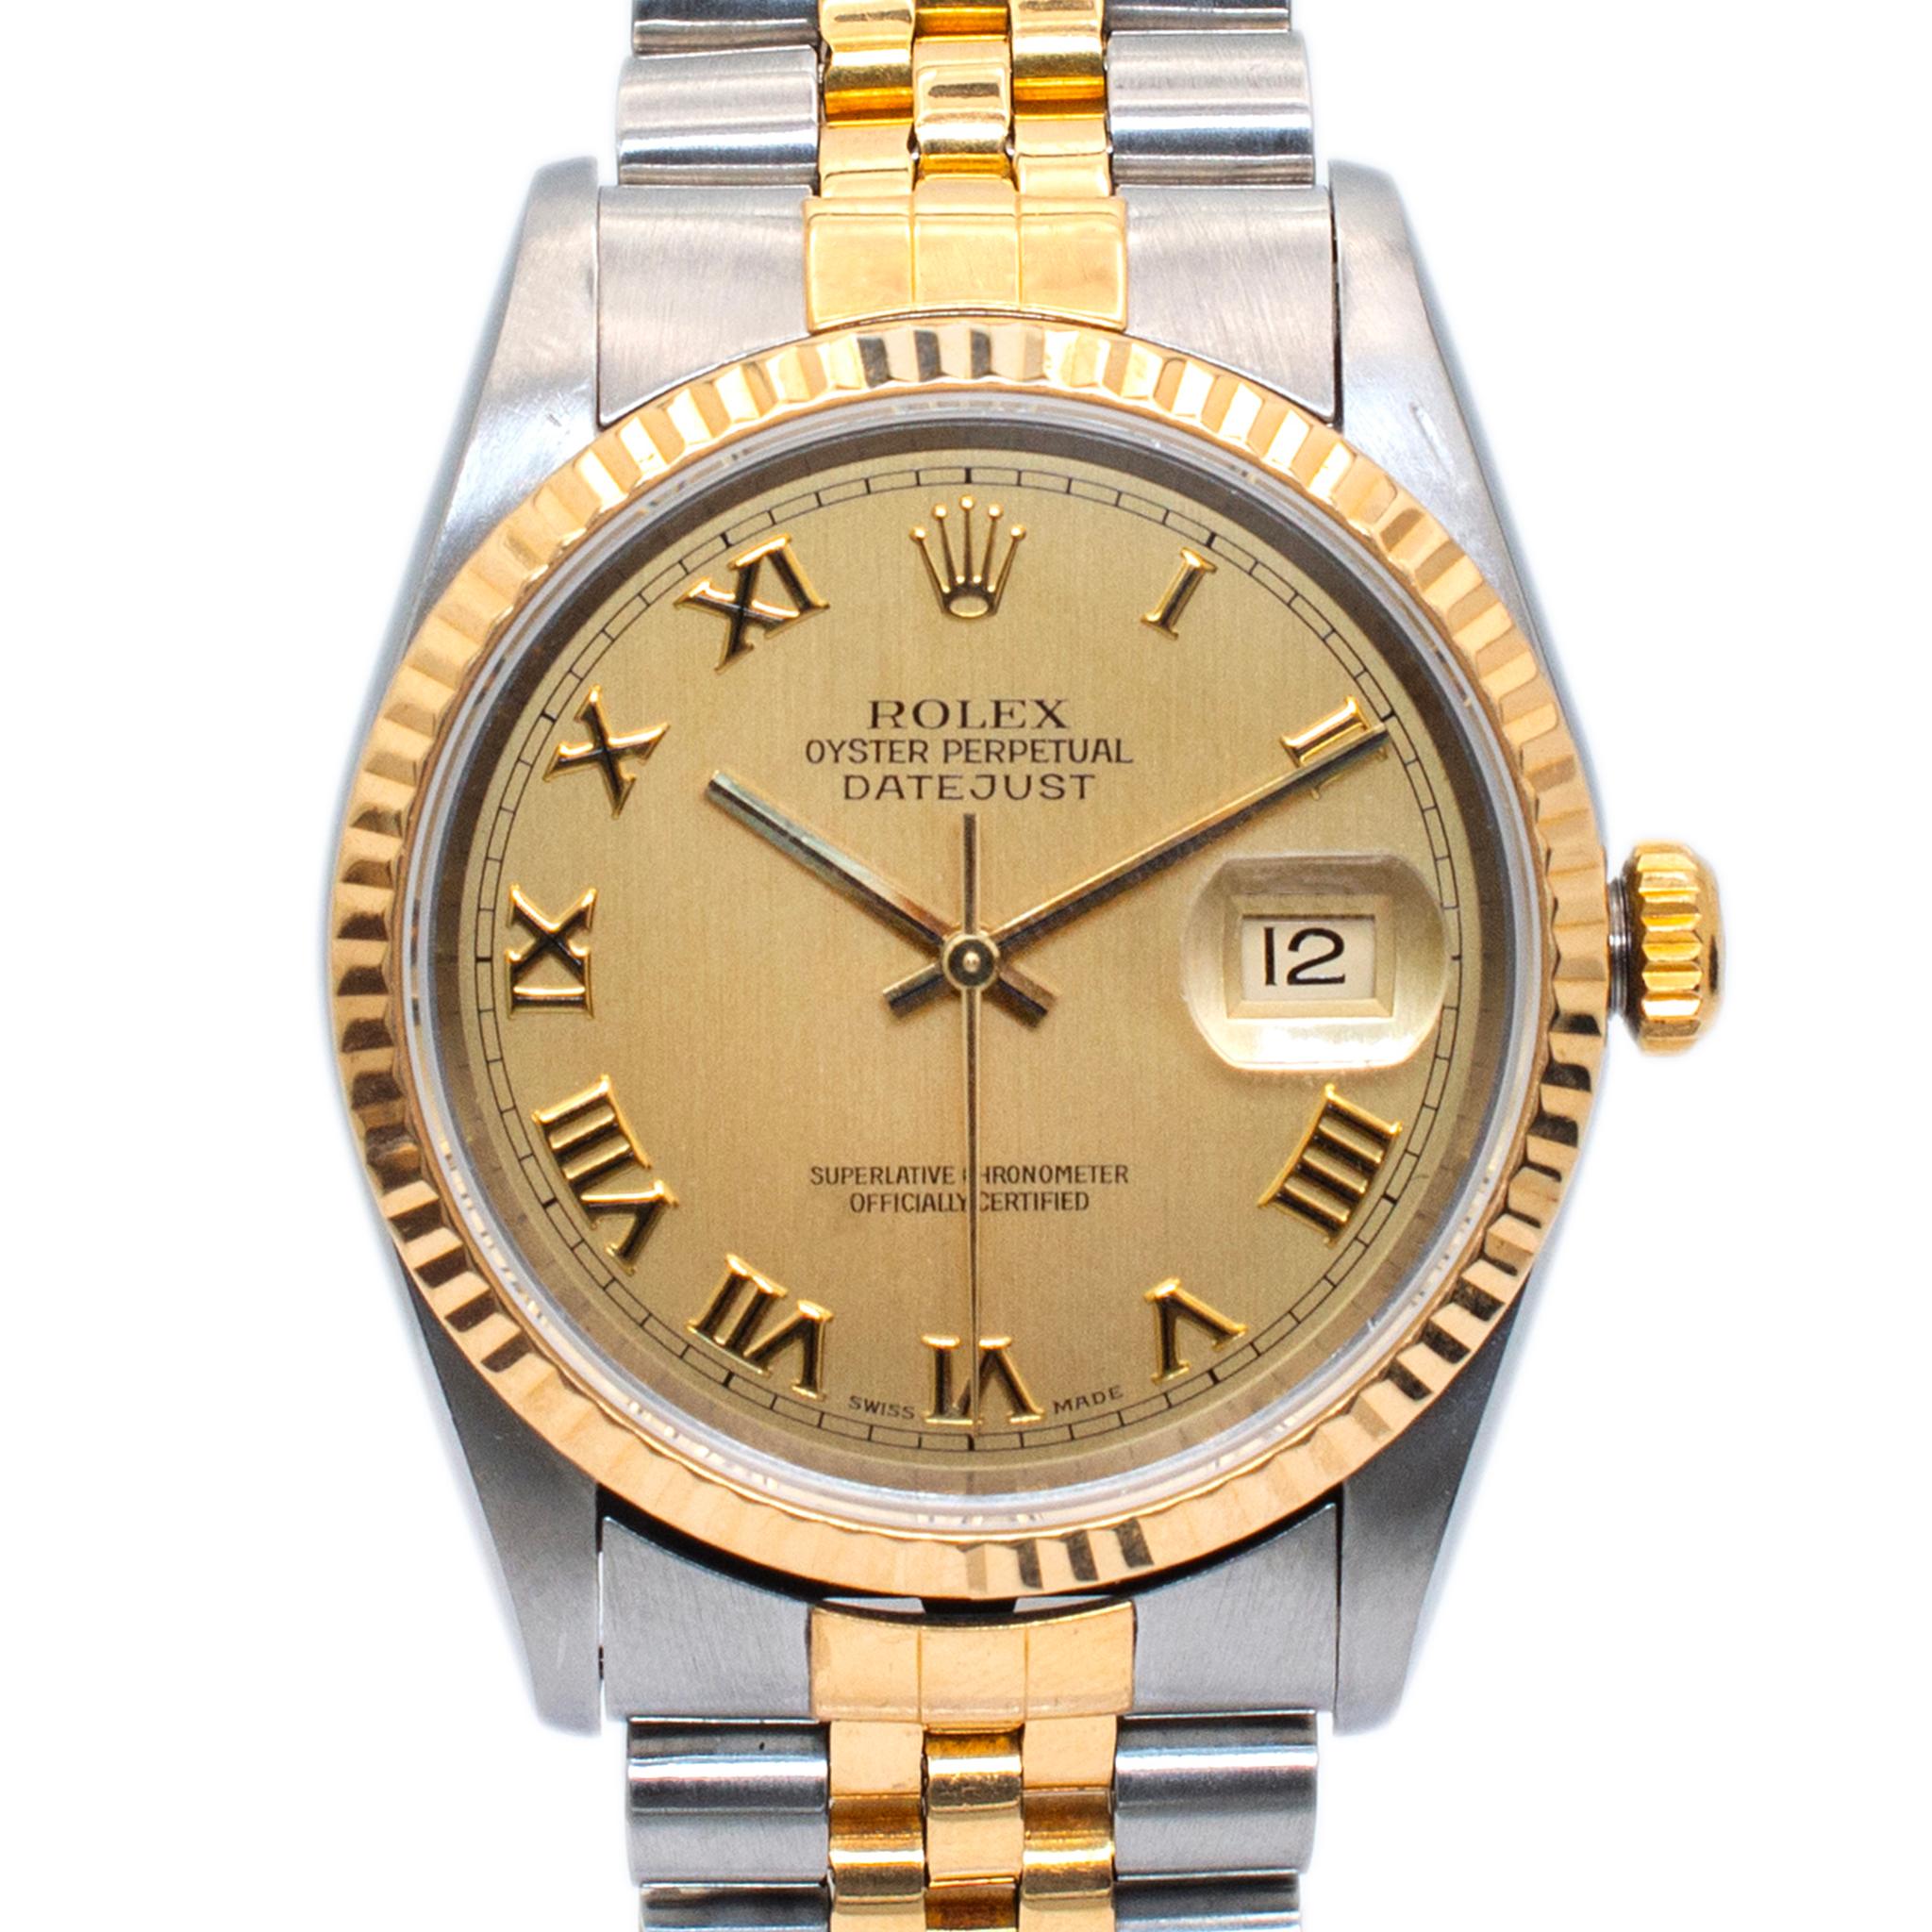 Brand: Rolex

Gender: Unisex

Metal Type: Stainless Steel

Diameter:  36.00 mm

Weight: 97.54 grams

One stainless steel, ROLEX Swiss-made watch with original box. The 